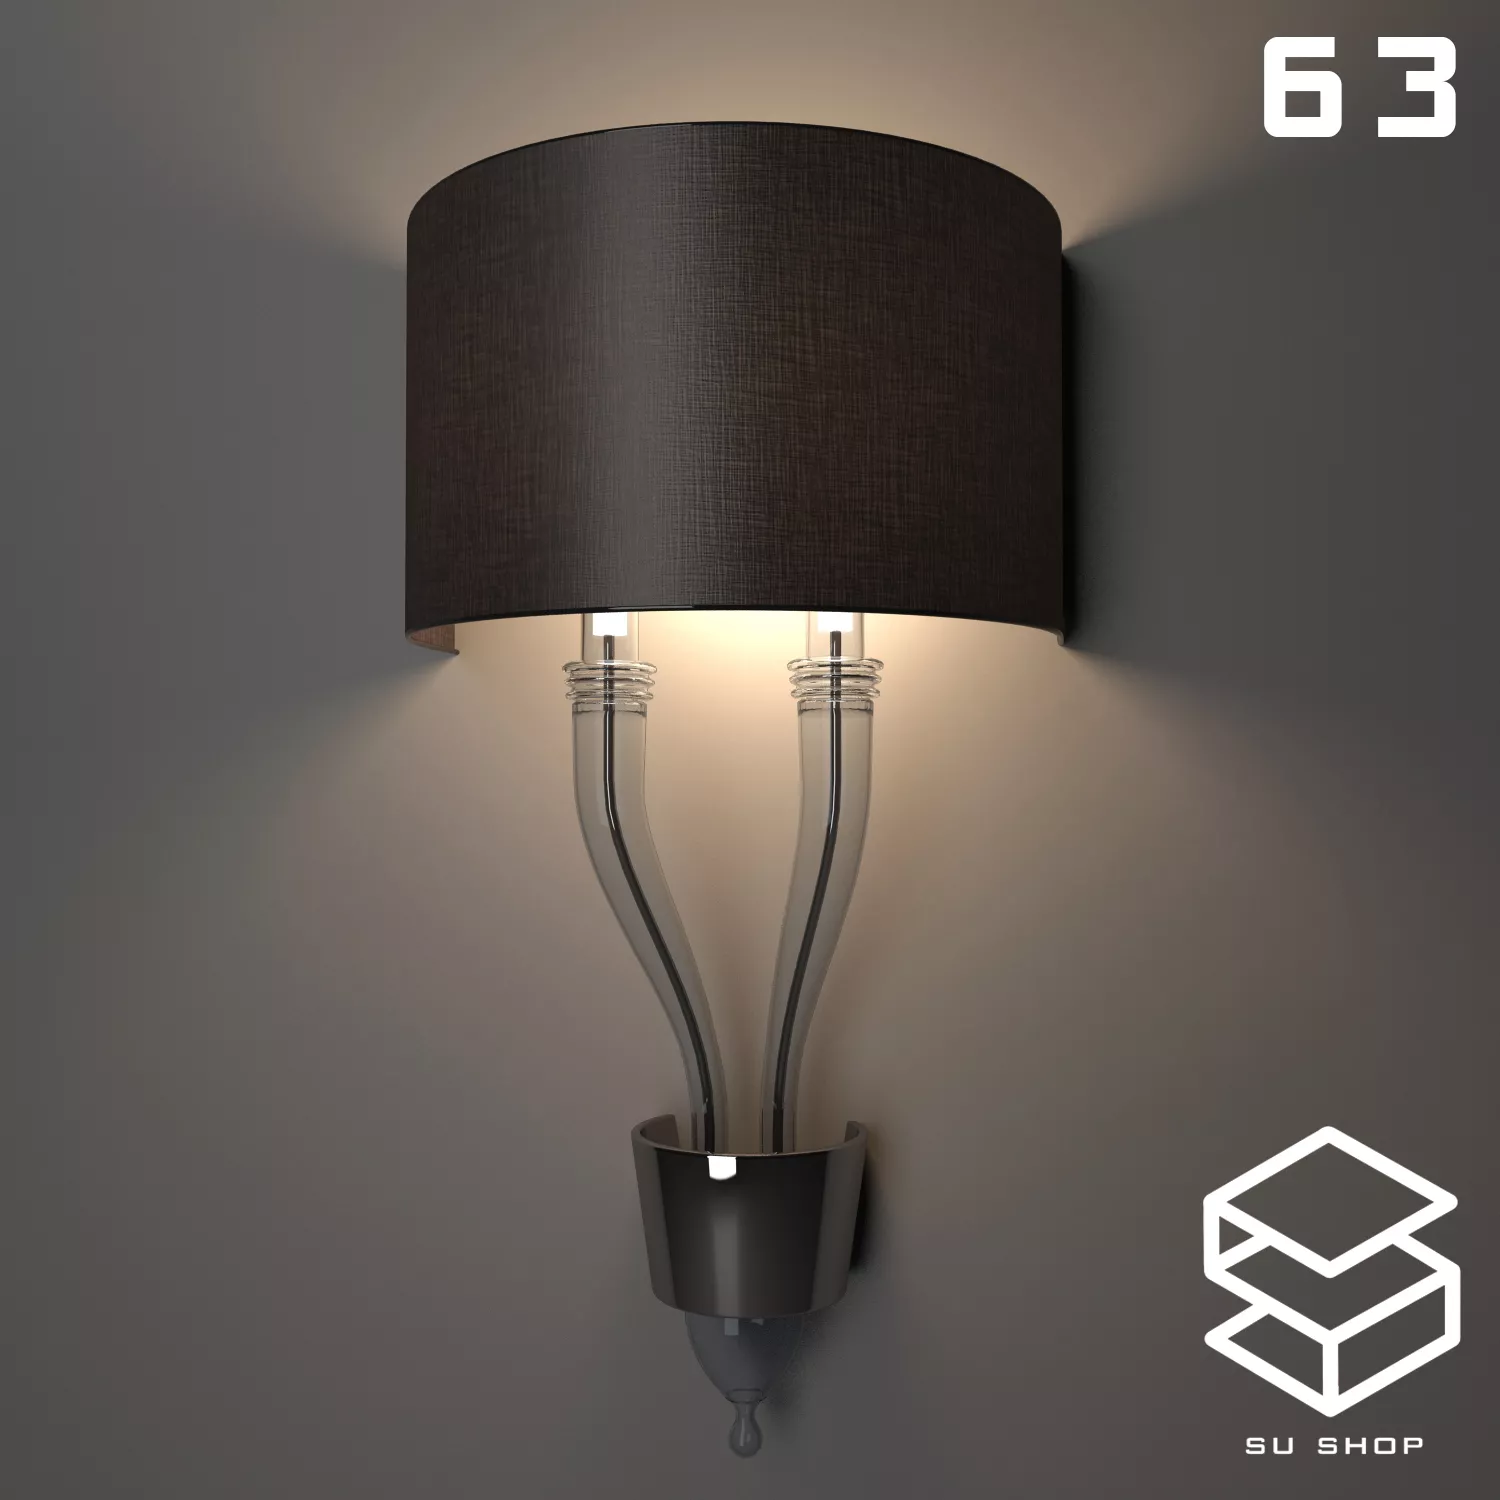 MODERN WALL LAMP - SKETCHUP 3D MODEL - VRAY OR ENSCAPE - ID16318